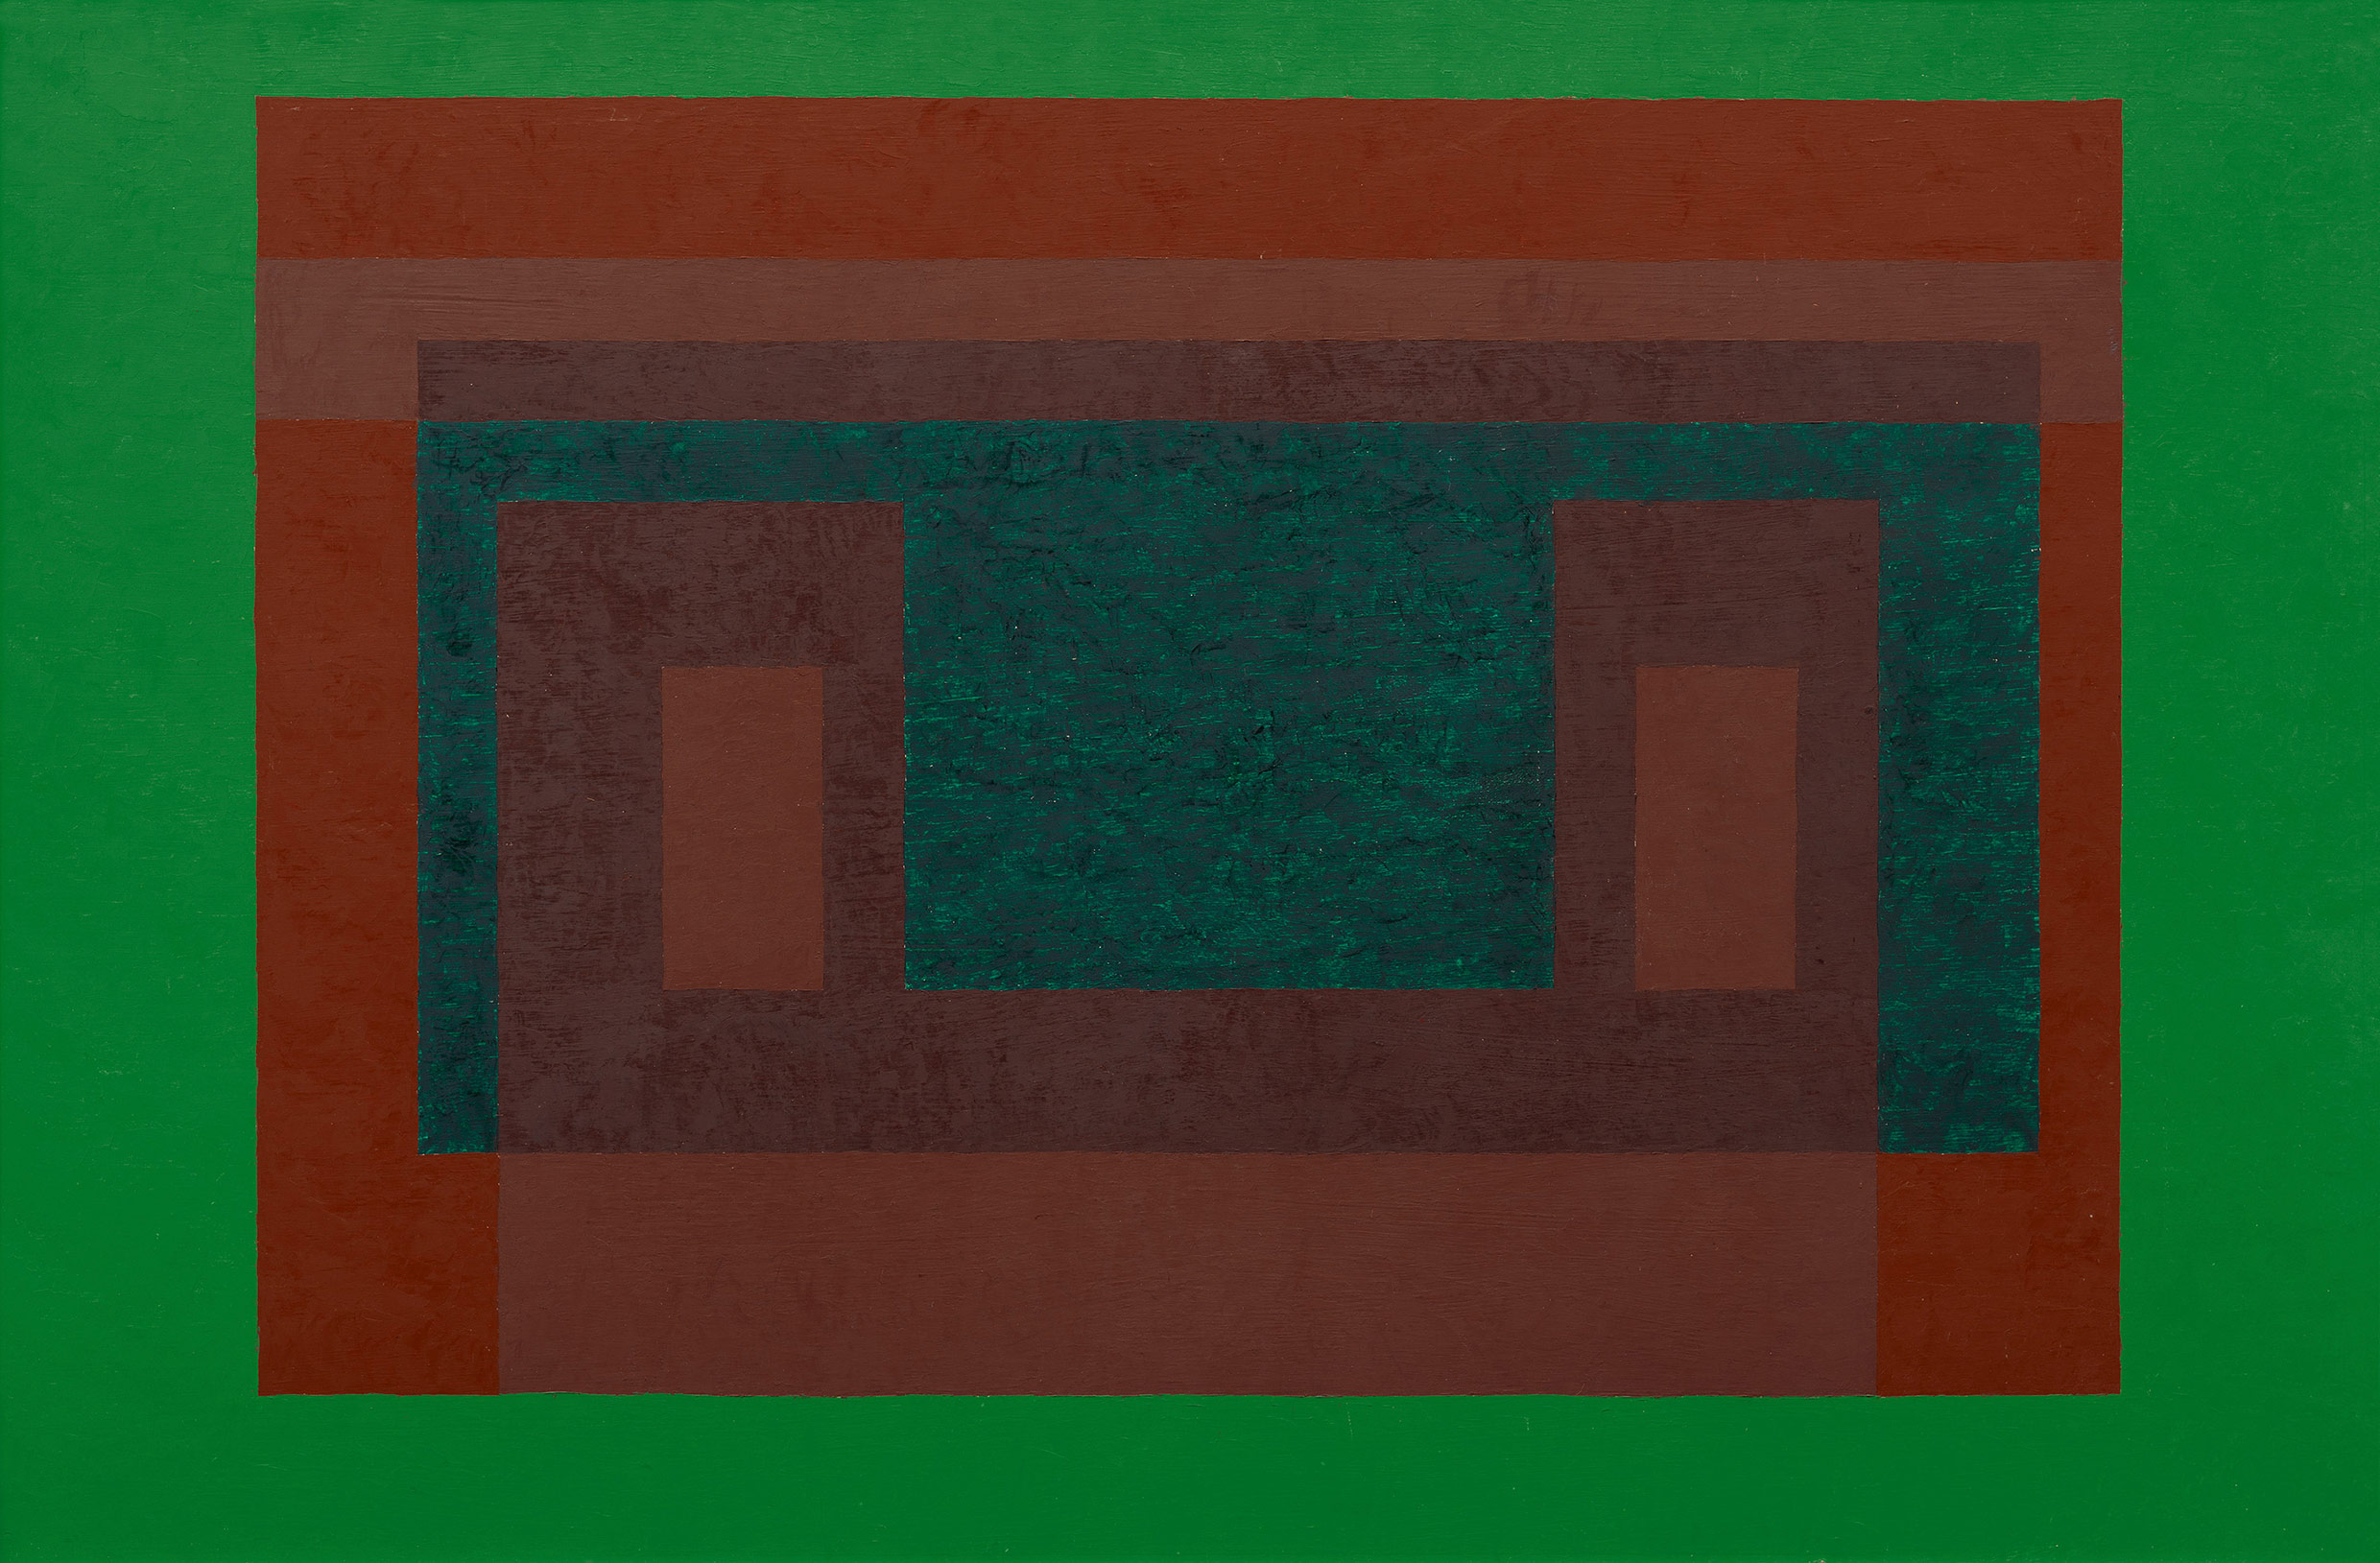 josef-albers-on-his-variant-paintings-the-guggenheim-museums-and-foundation